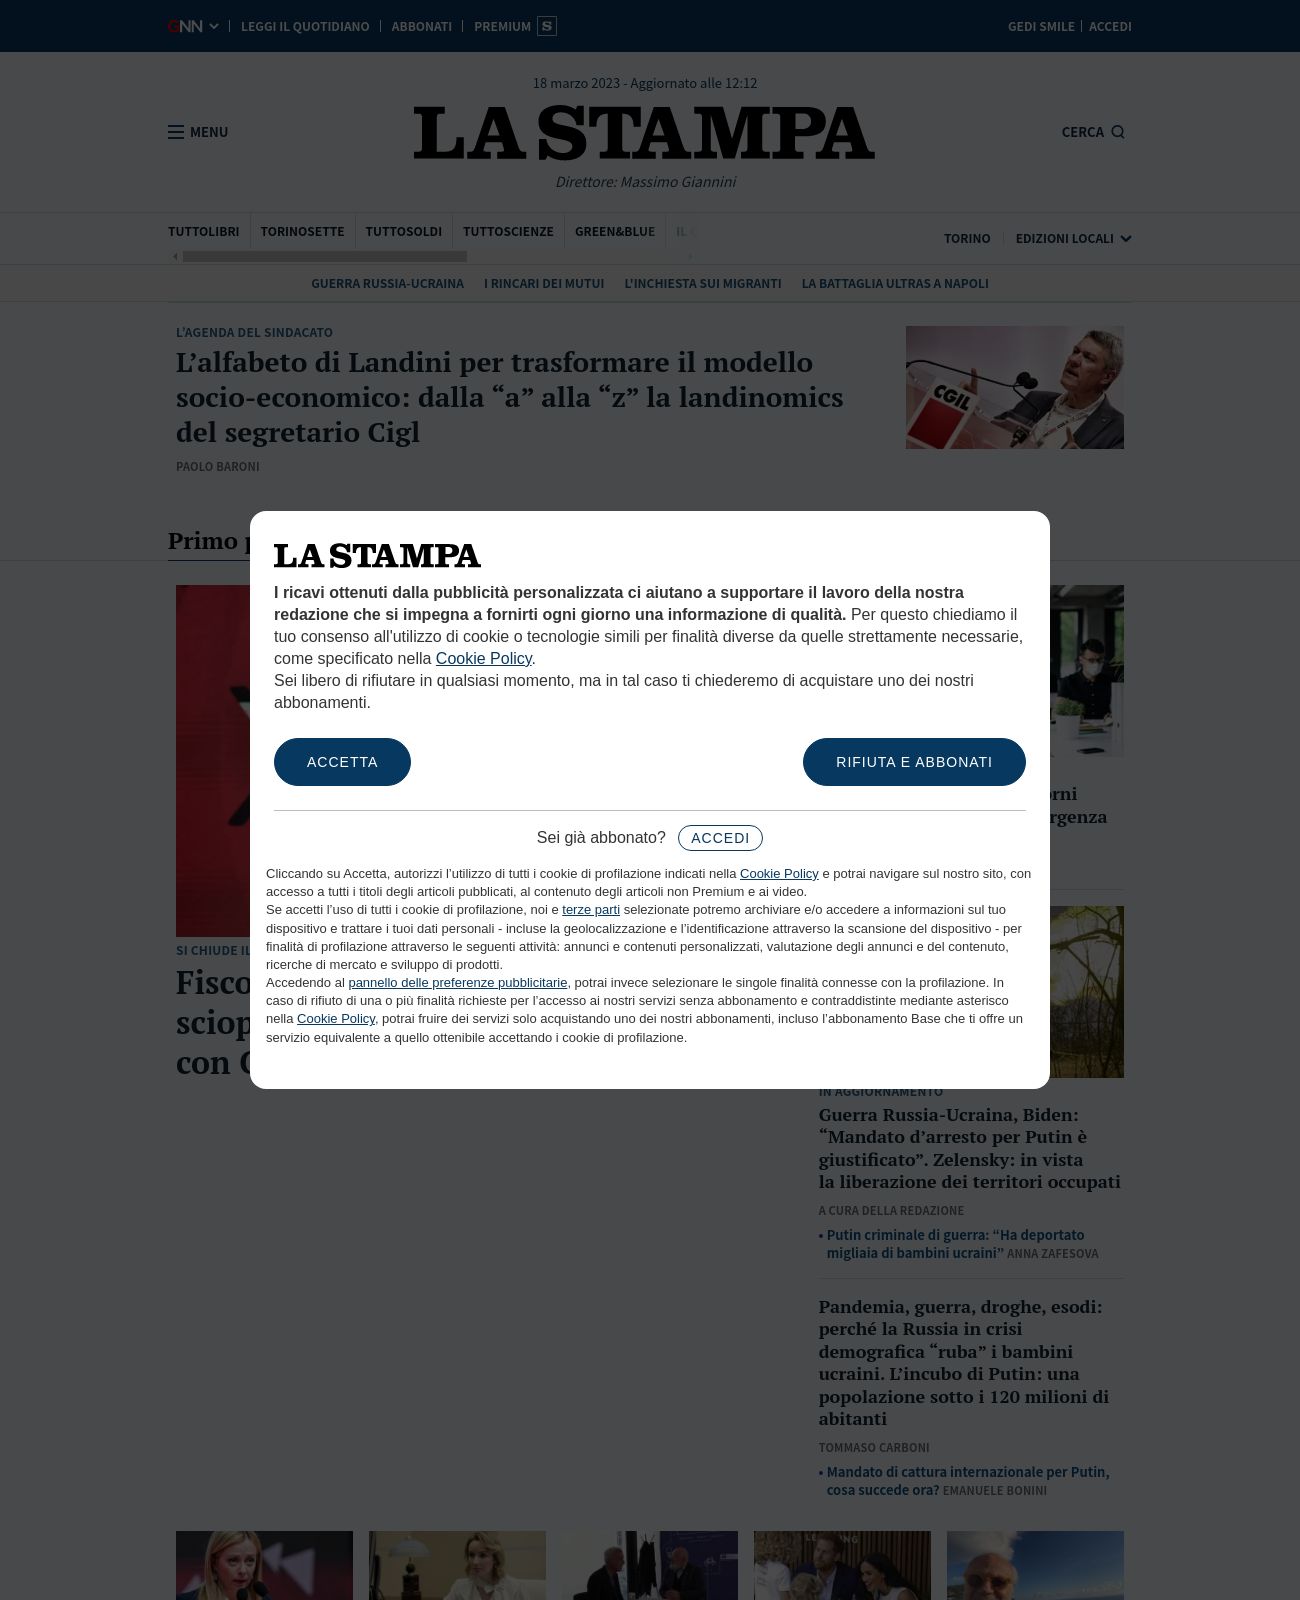 La Stampa at 2023-03-18 12:24:32+01:00 local time